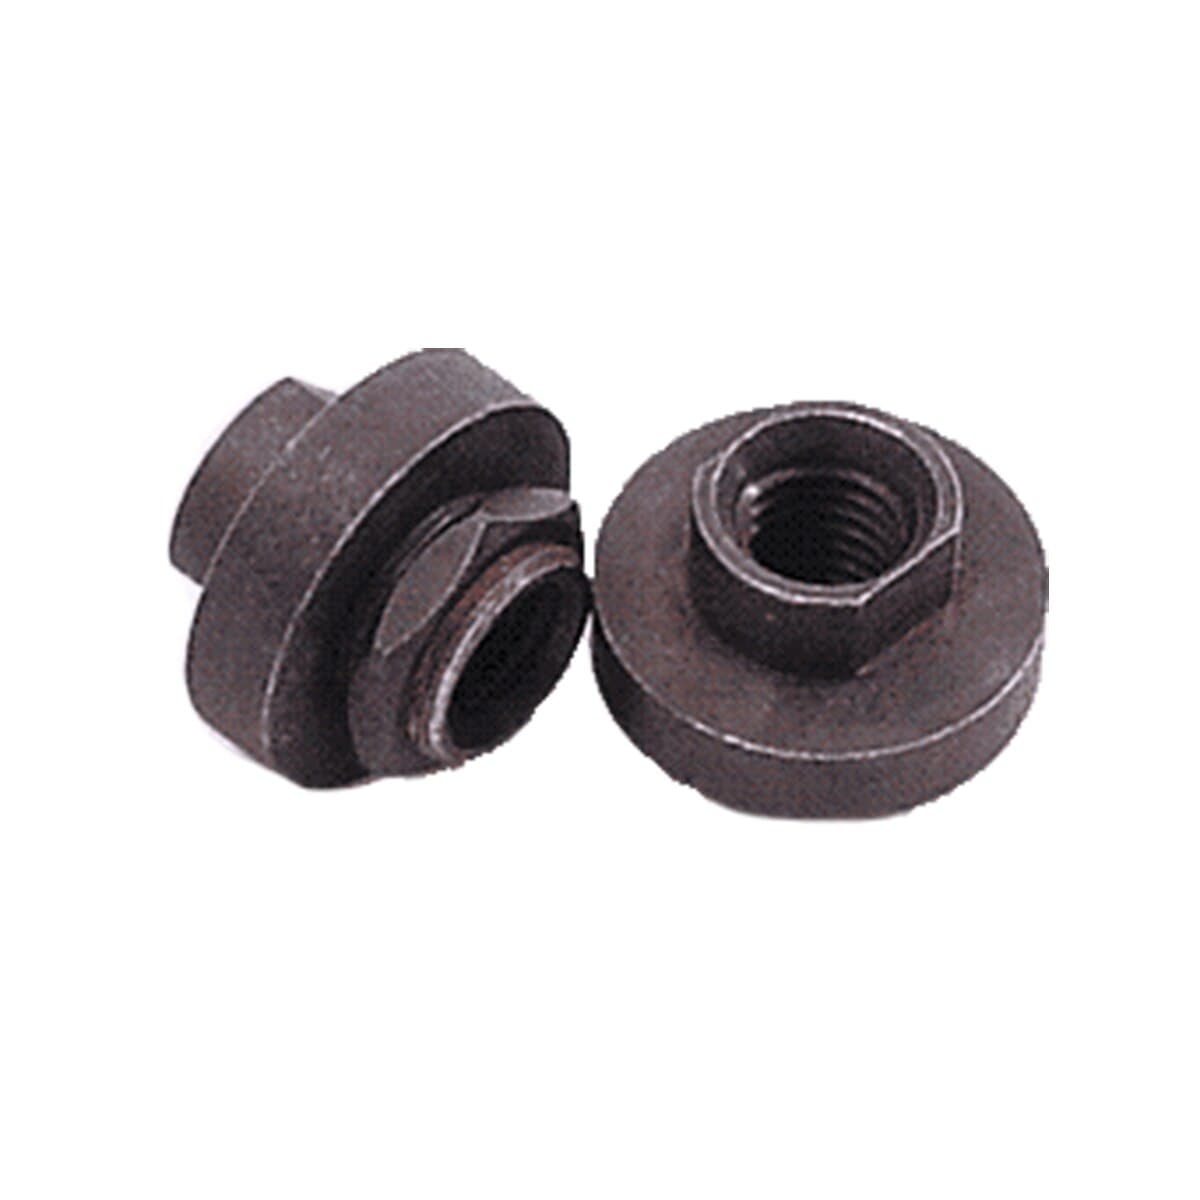 Adaptor for Cup Wheels - Diamond Tool Store